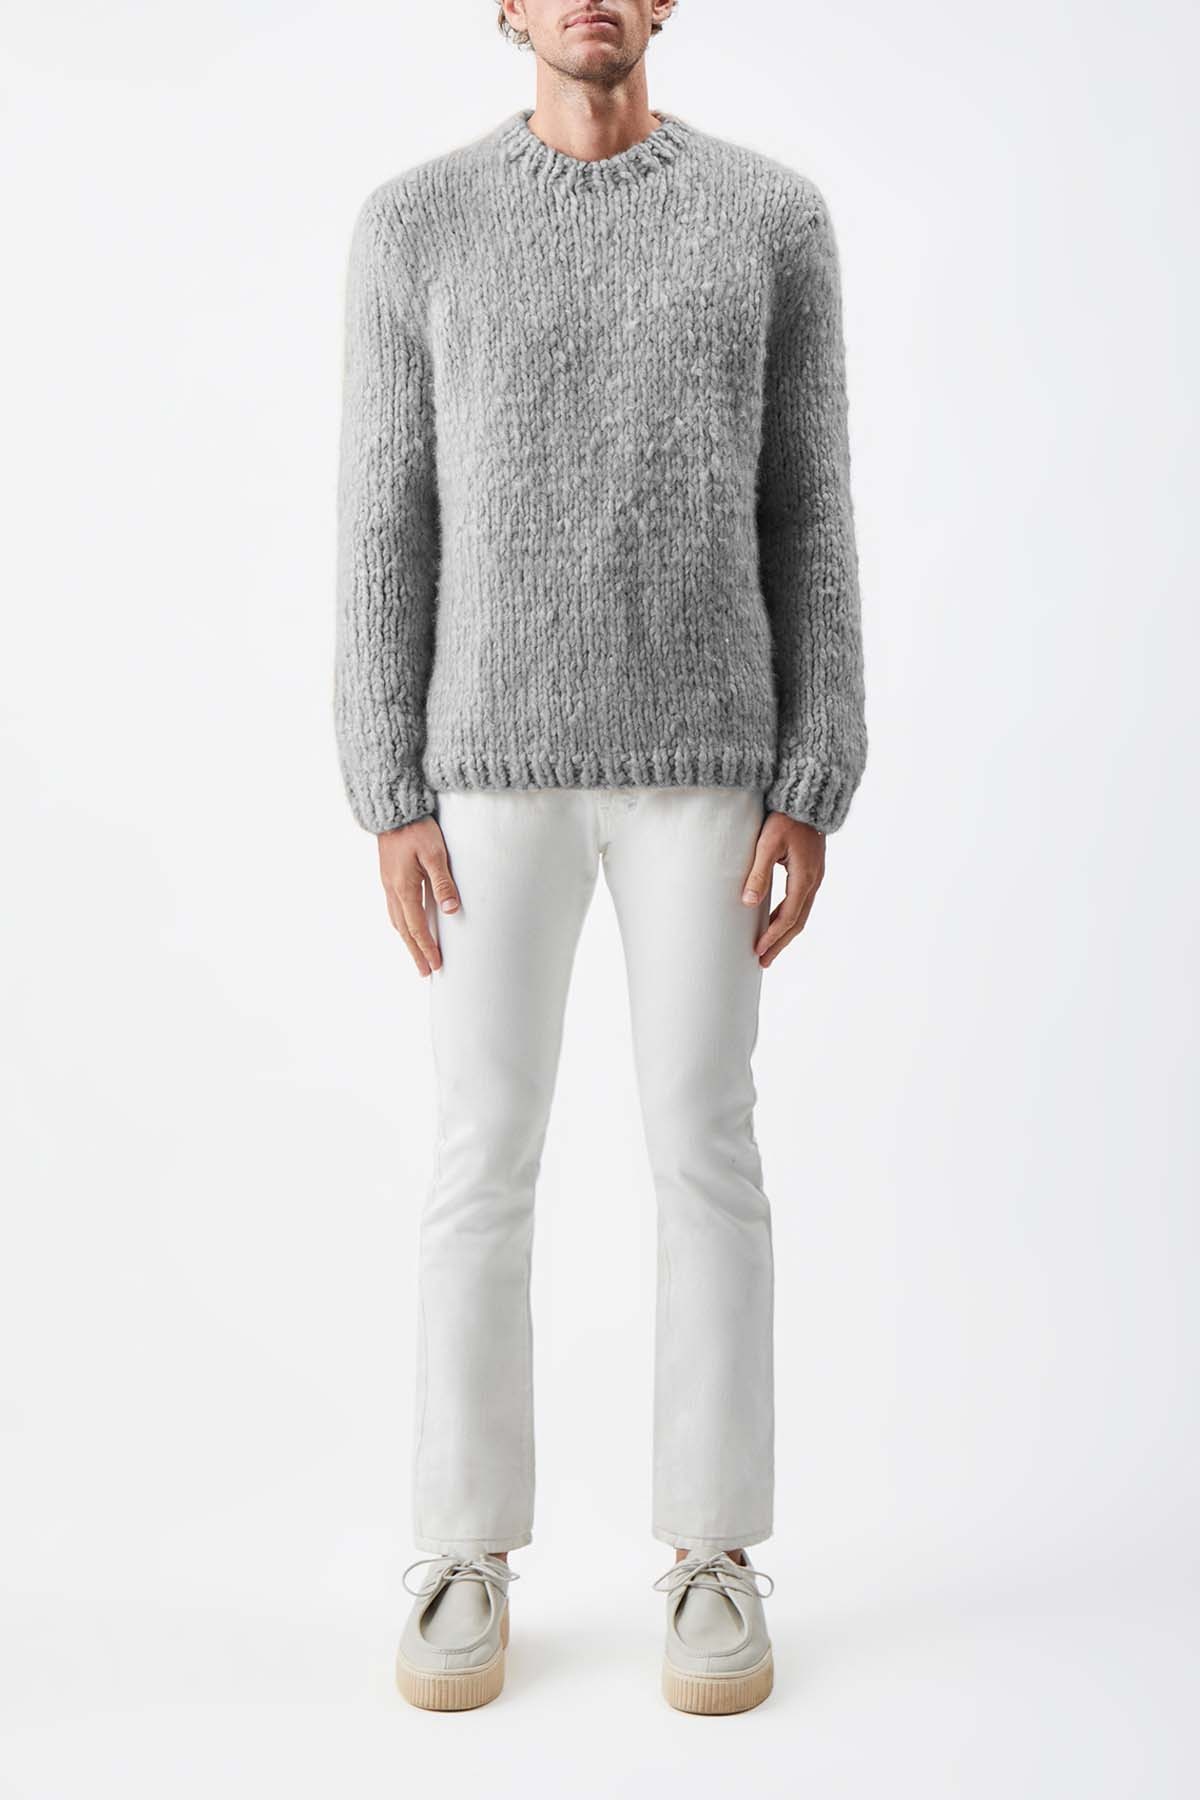 Lawrence Knit Sweater in Heather Grey Welfat Cashmere - 2